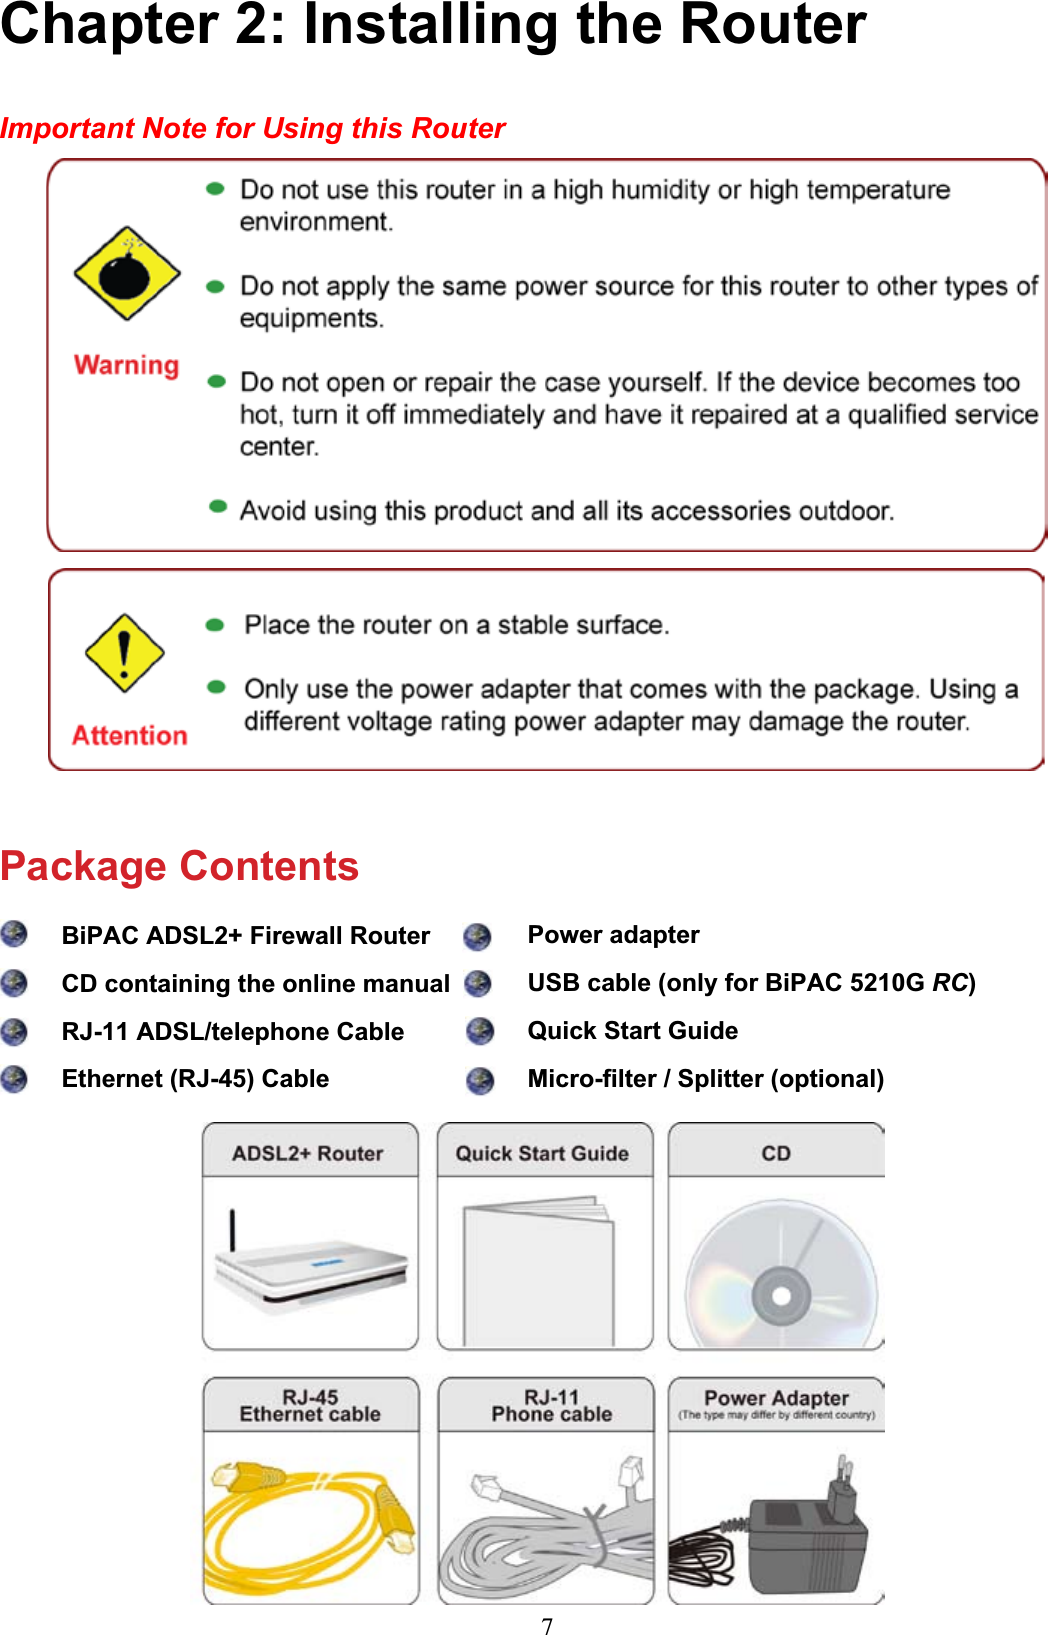 7Chapter 2: Installing the RouterImportant Note for Using this RouterPackage ContentsBiPAC ADSL2+ Firewall Router CD containing the online manual RJ-11 ADSL/telephone Cable Ethernet (RJ-45) Cable Power adapterUSB cable (only for BiPAC 5210G RC)Quick Start Guide0LFUR¿OWHU6SOLWWHURSWLRQDO